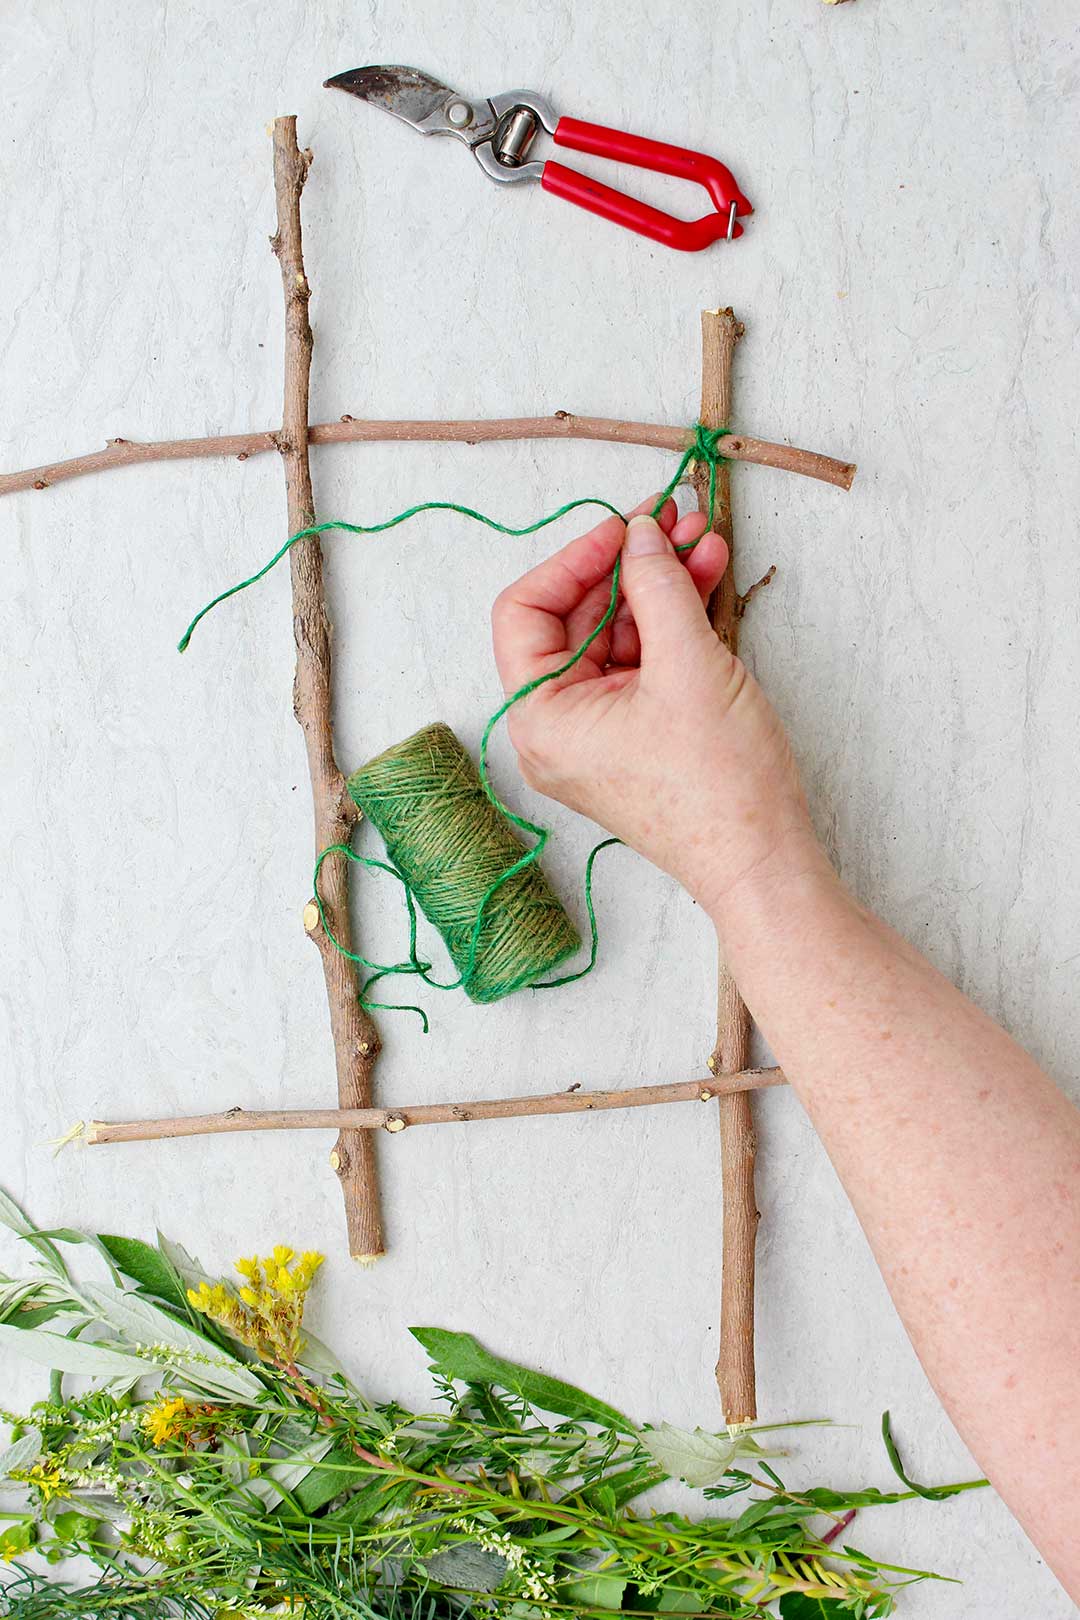 Hand securing green string to the crosspoint of two twigs on nature weaving project.